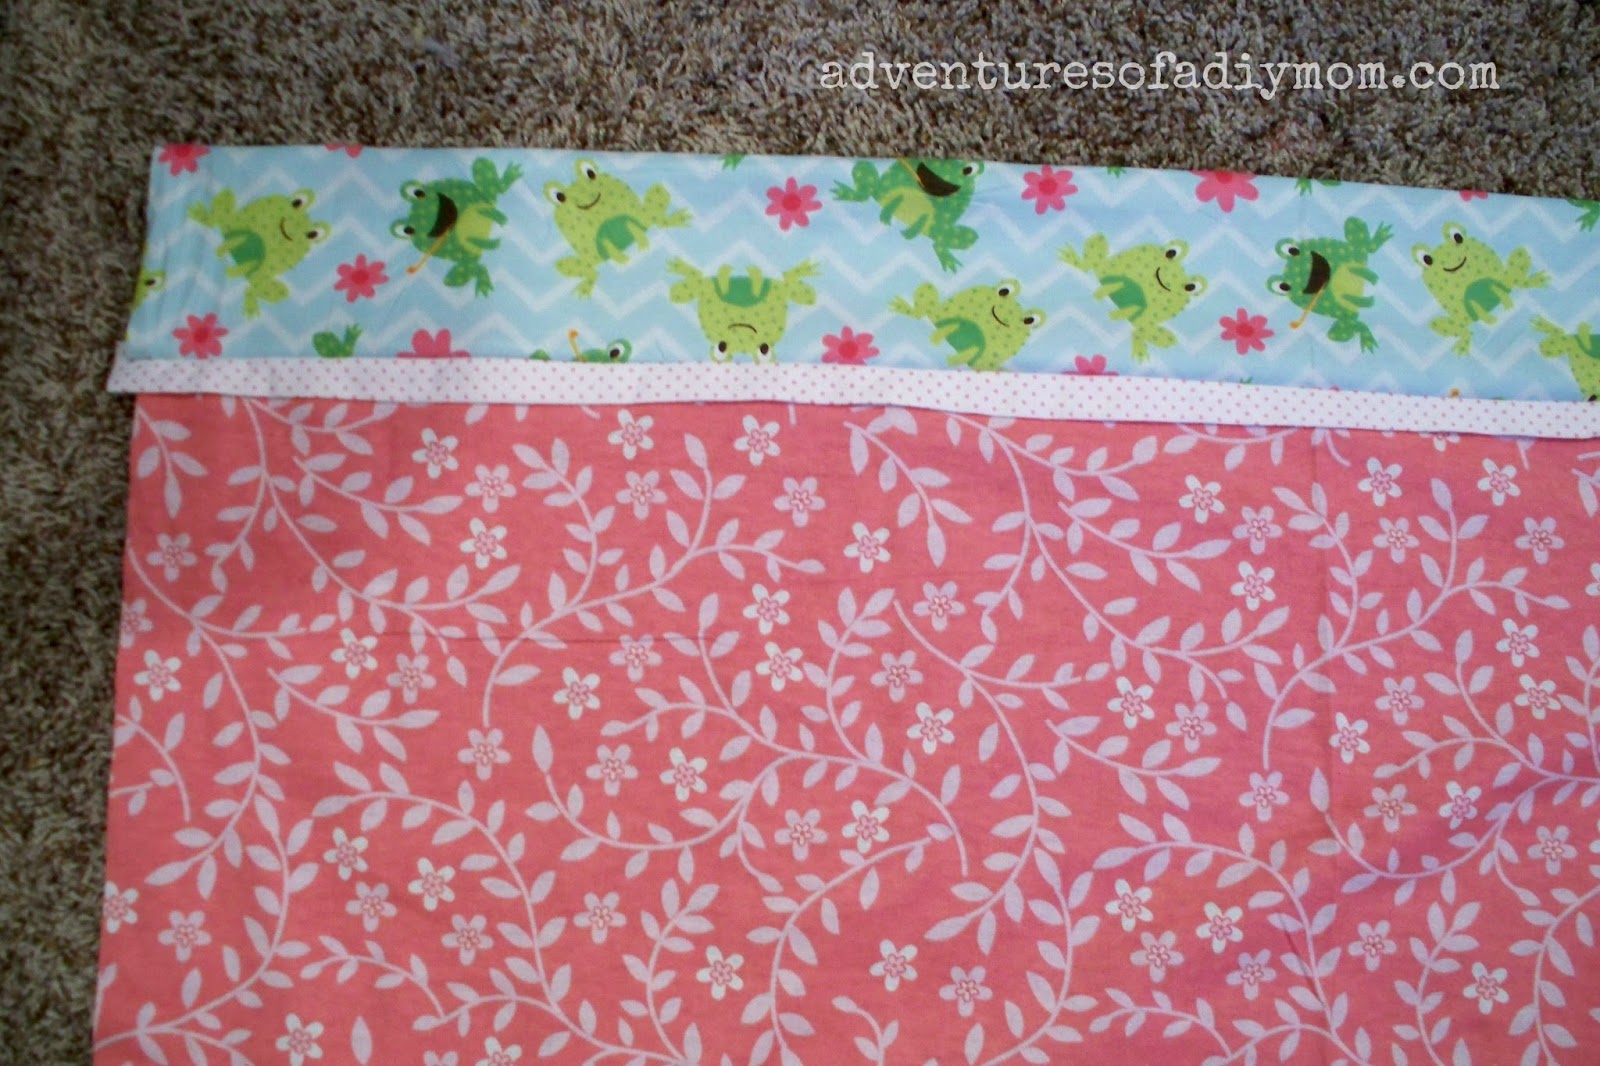 sewing the tube pillow case